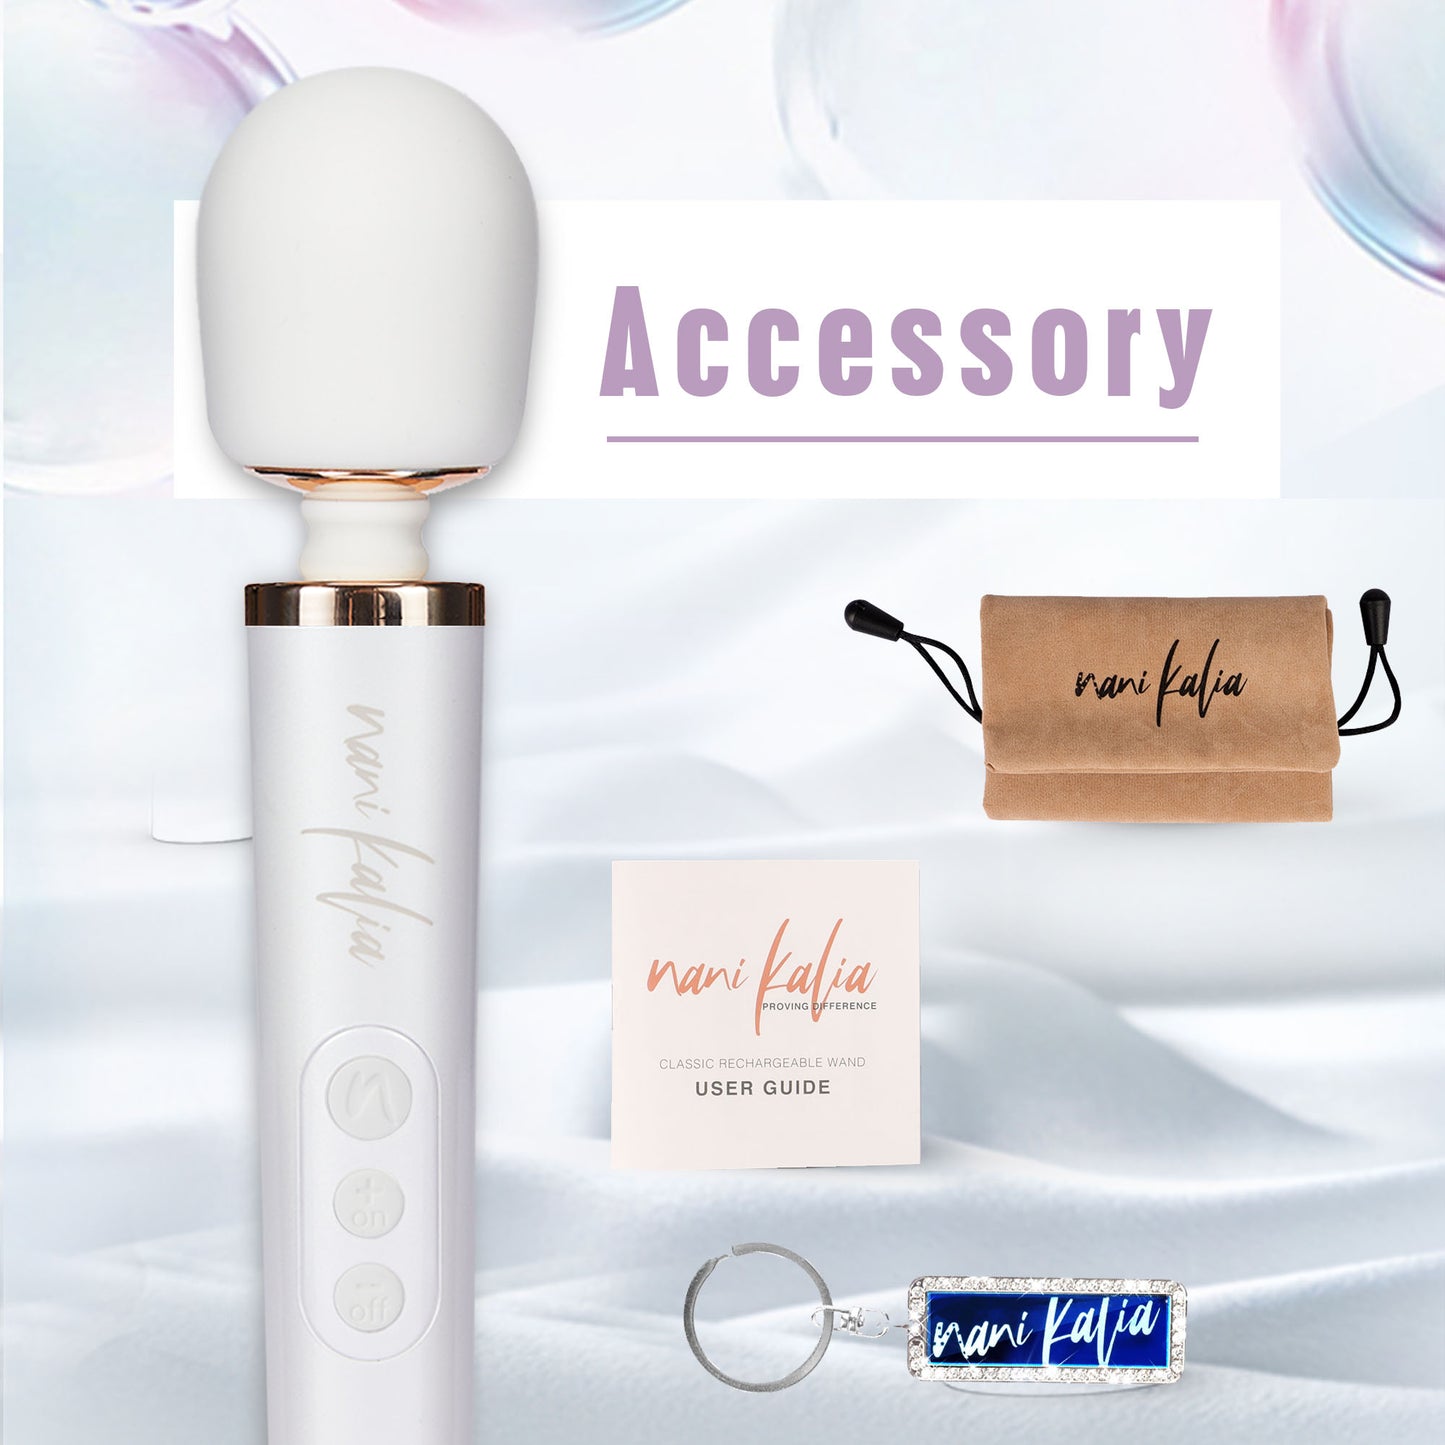 Nani Kalia Wand, Magnetic Rechargeable Waterproof Design 20 Vibration Mode Massager Fine-tuned Vibration Relaxation Function Soft High Quality Silicone (NK18 White)